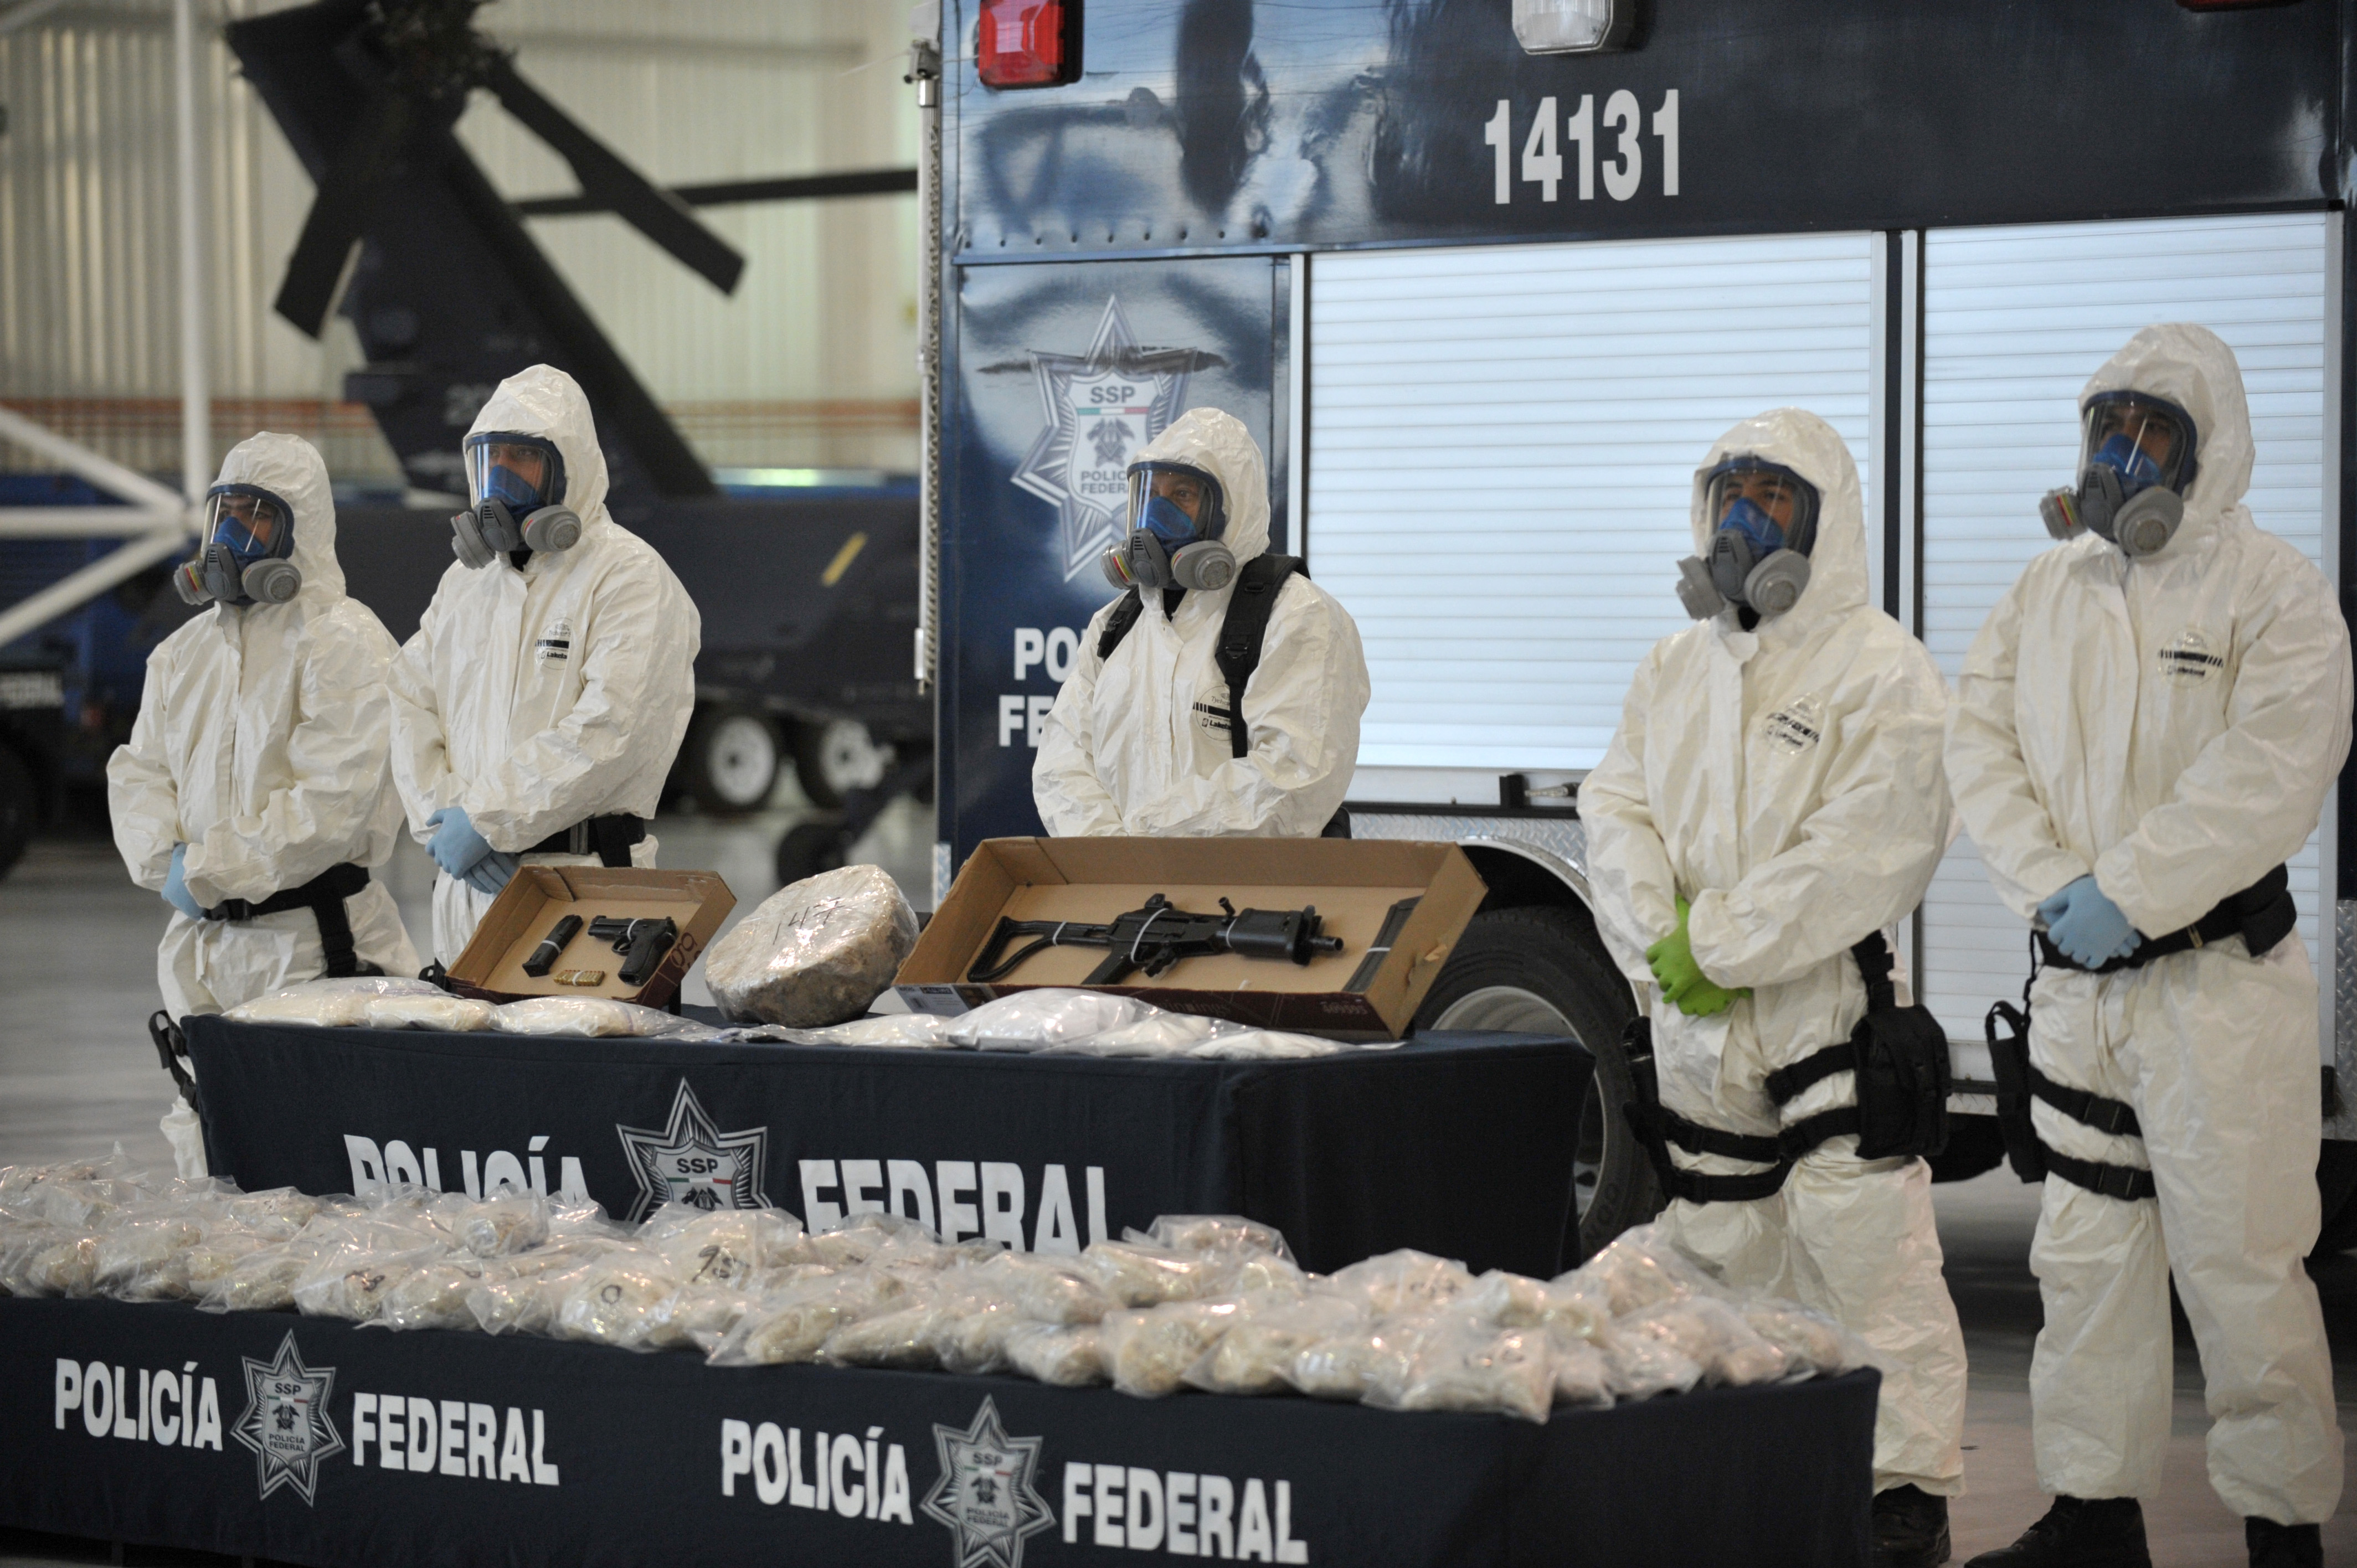 After El Chapo: Experts Discuss the Future of the International Drug Trade